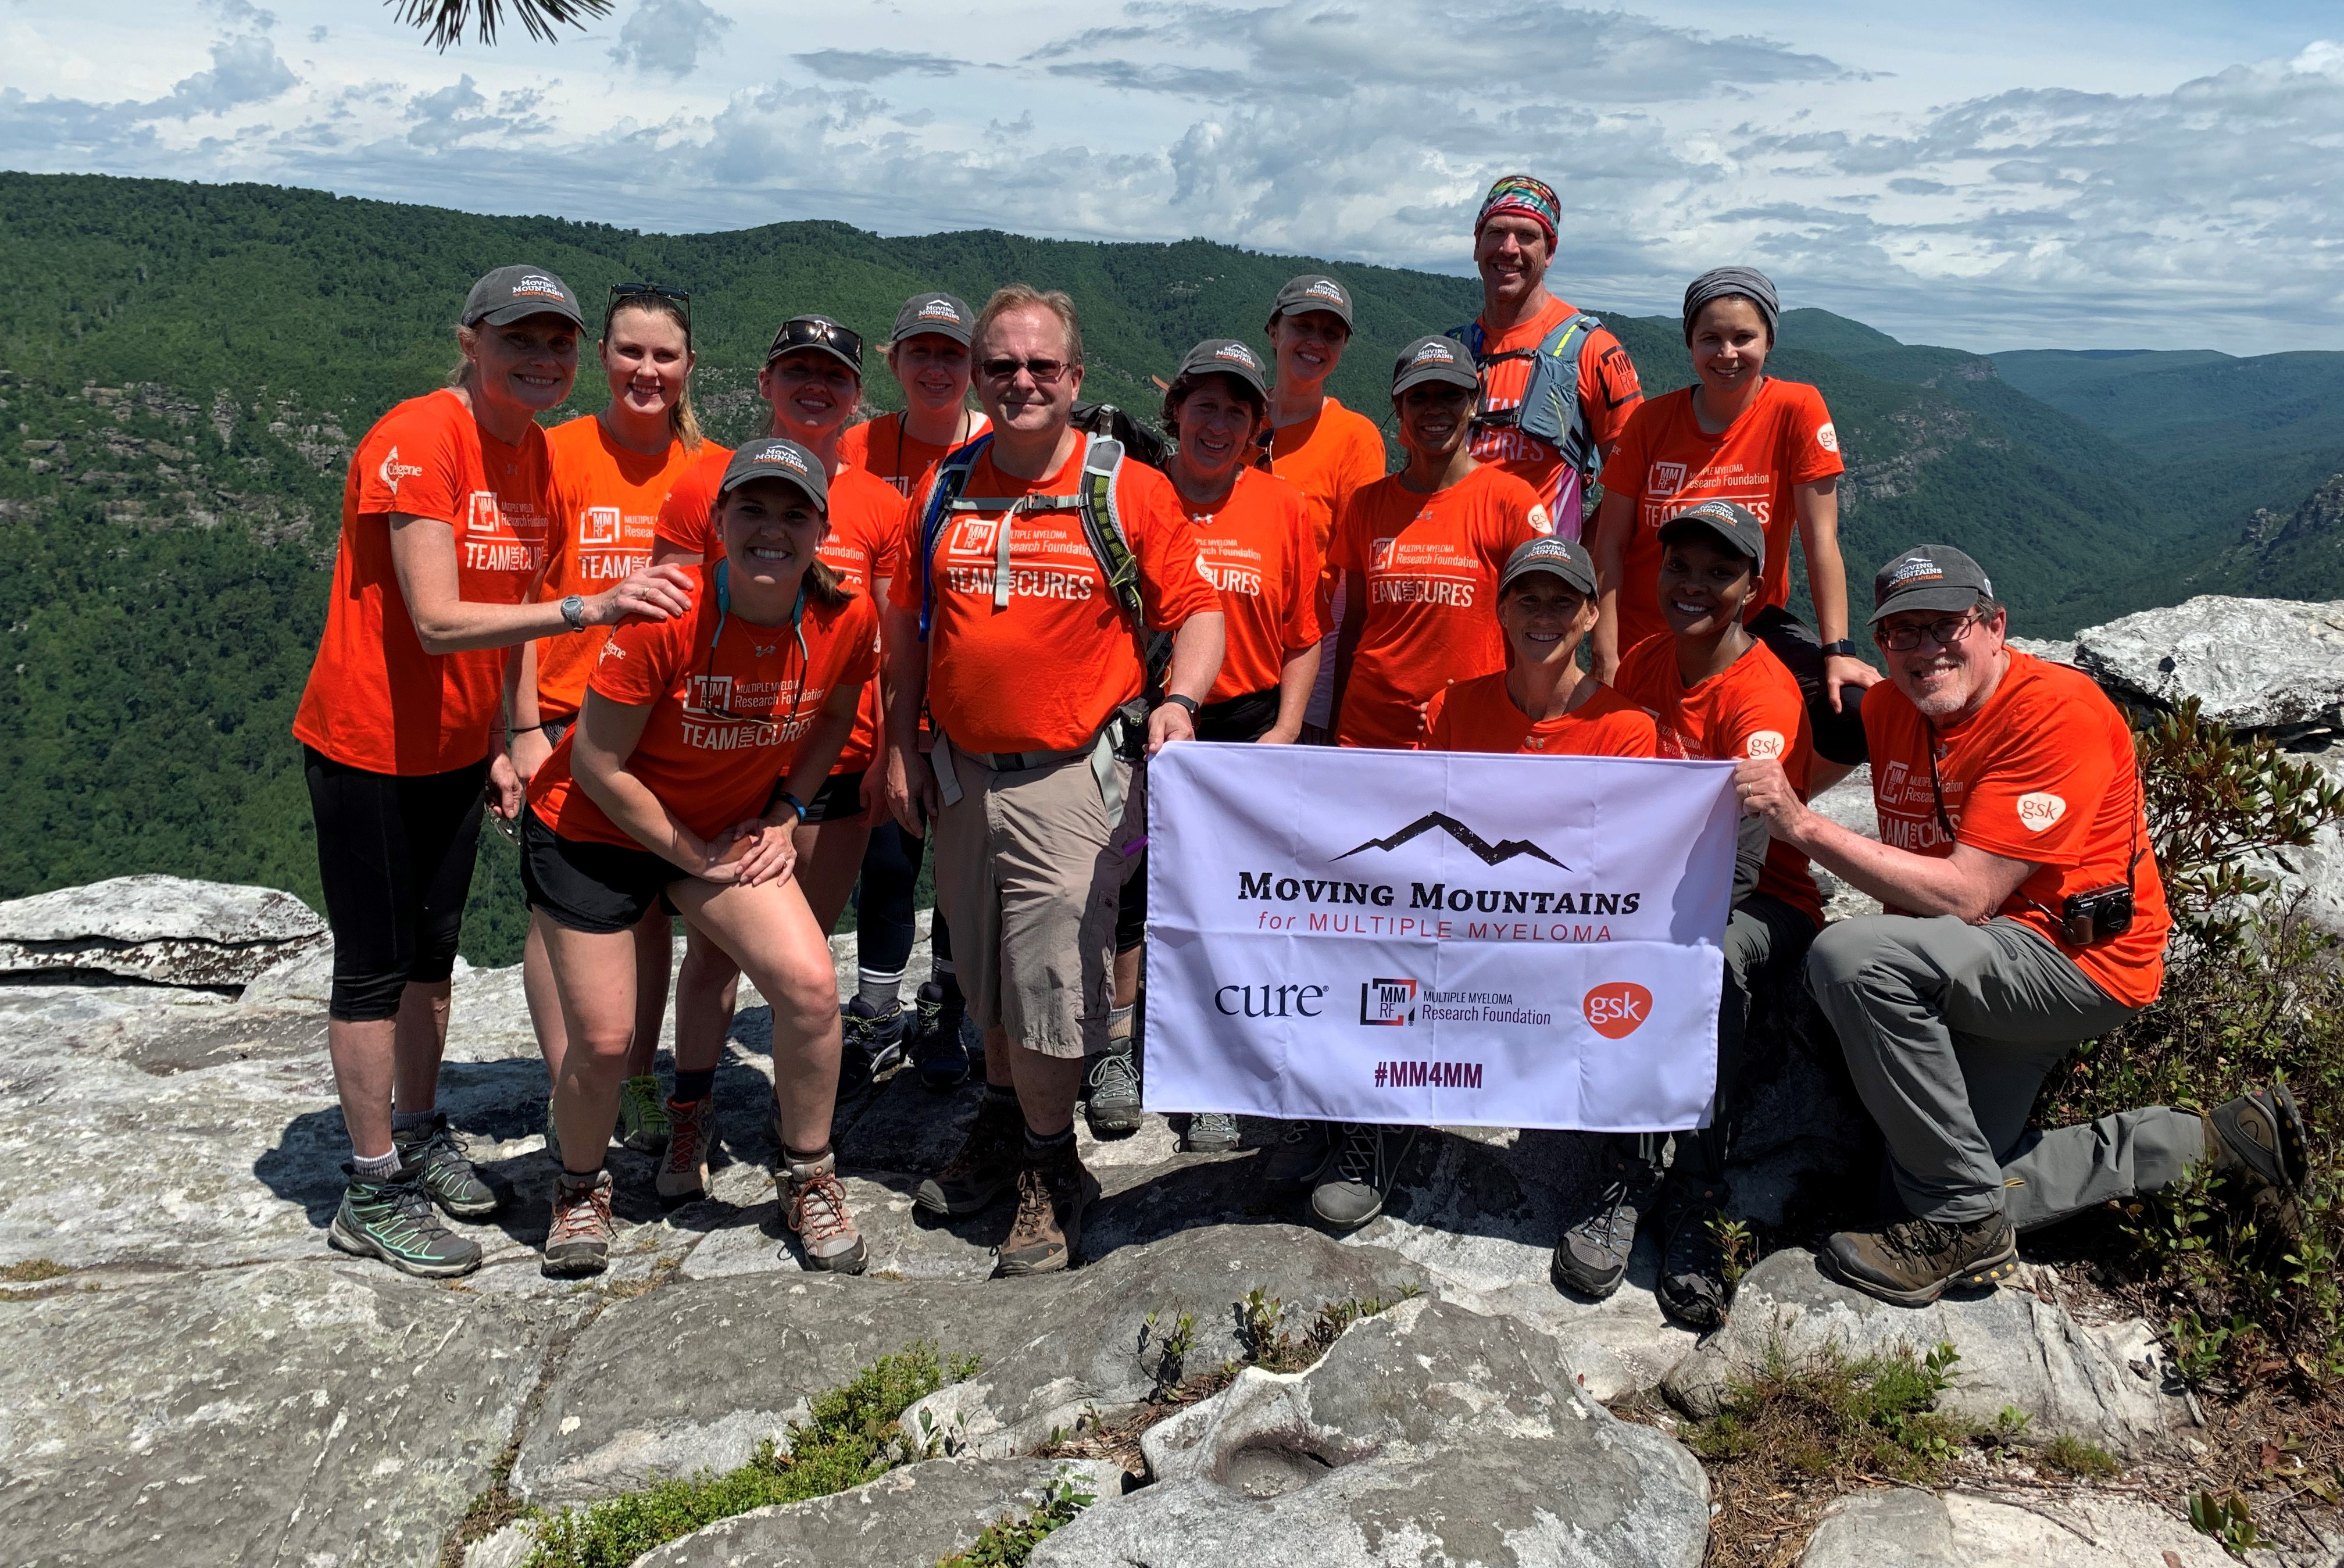 Meredith with the team of hikers who will all participate in Moving Mountains for Multiple Myeloma in Iceland to raise awareness of this disease. 